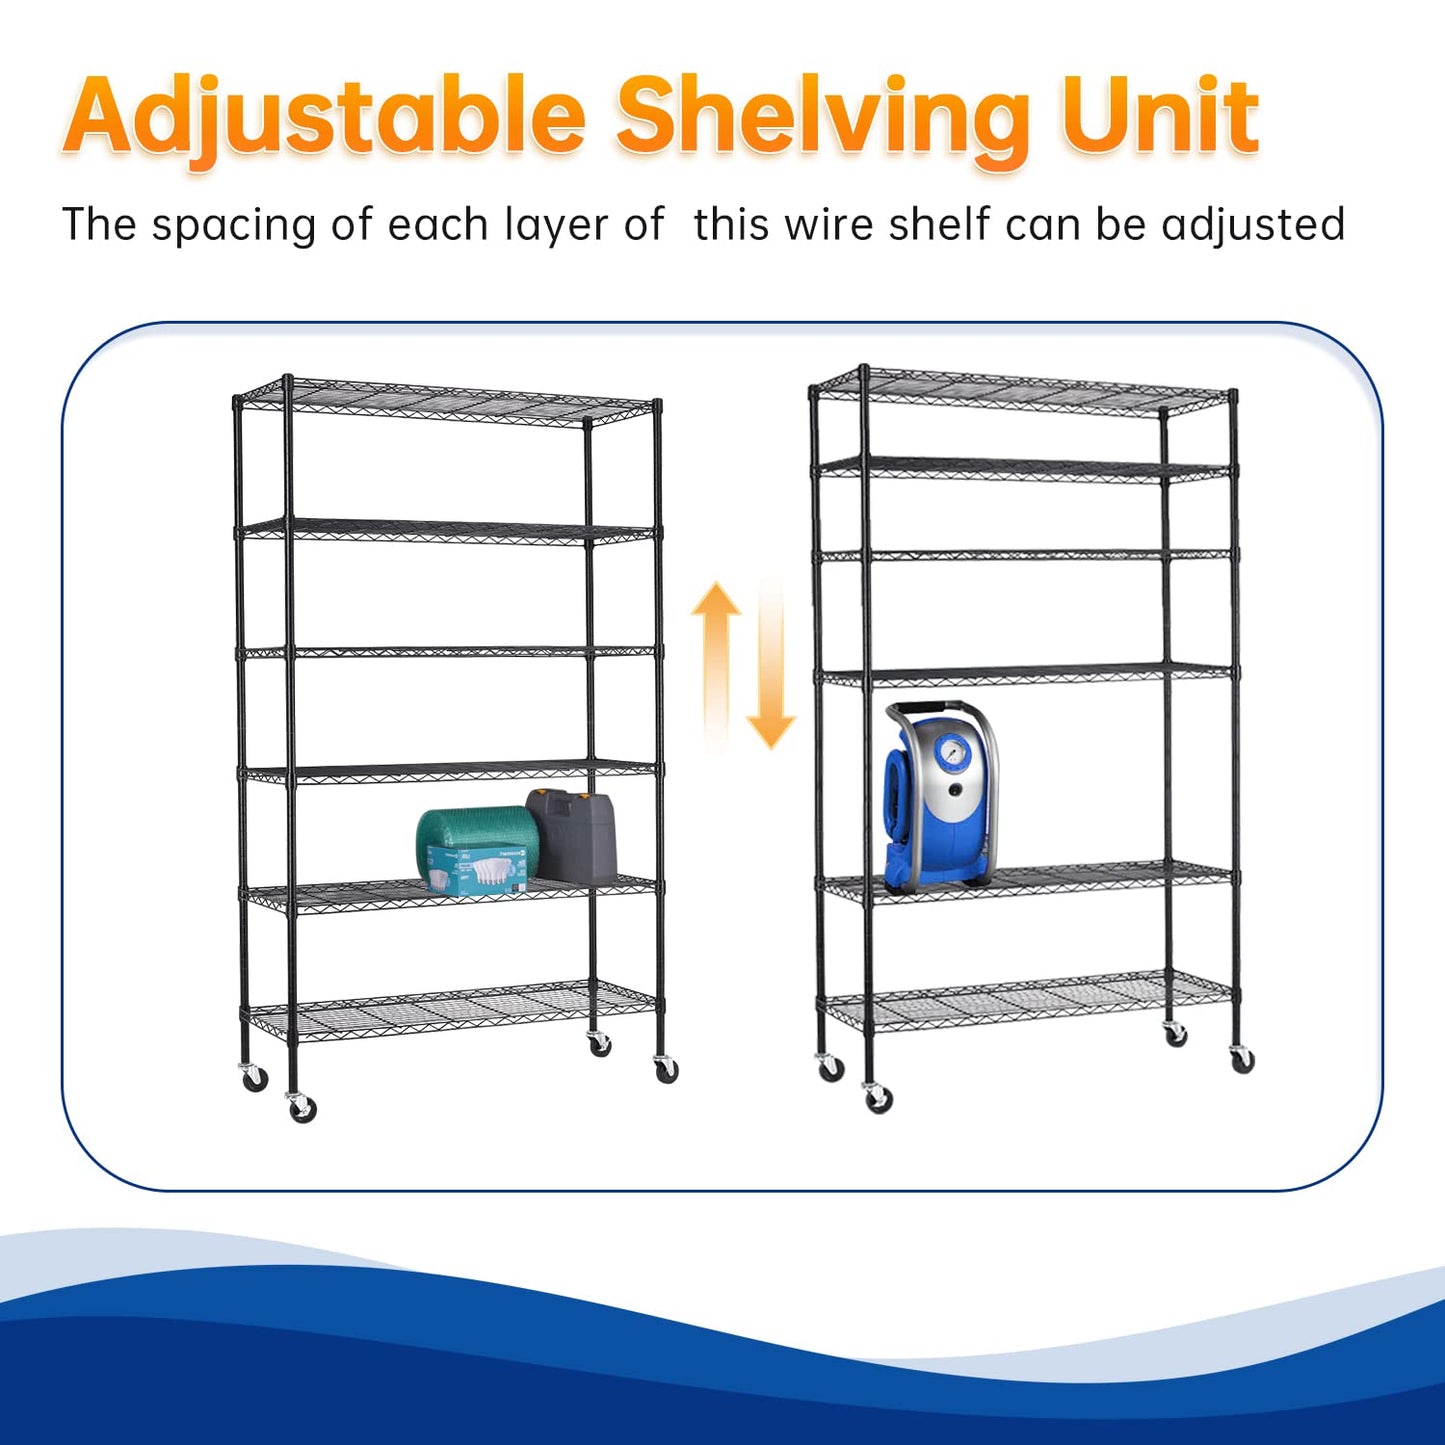 Storage Shelves 2100Lbs Capacity, 6-Shelf on Casters 48" L×18" W×72" H Commercial Wire Shelving Unit Adjustable Layer Metal Rack Strong Steel for